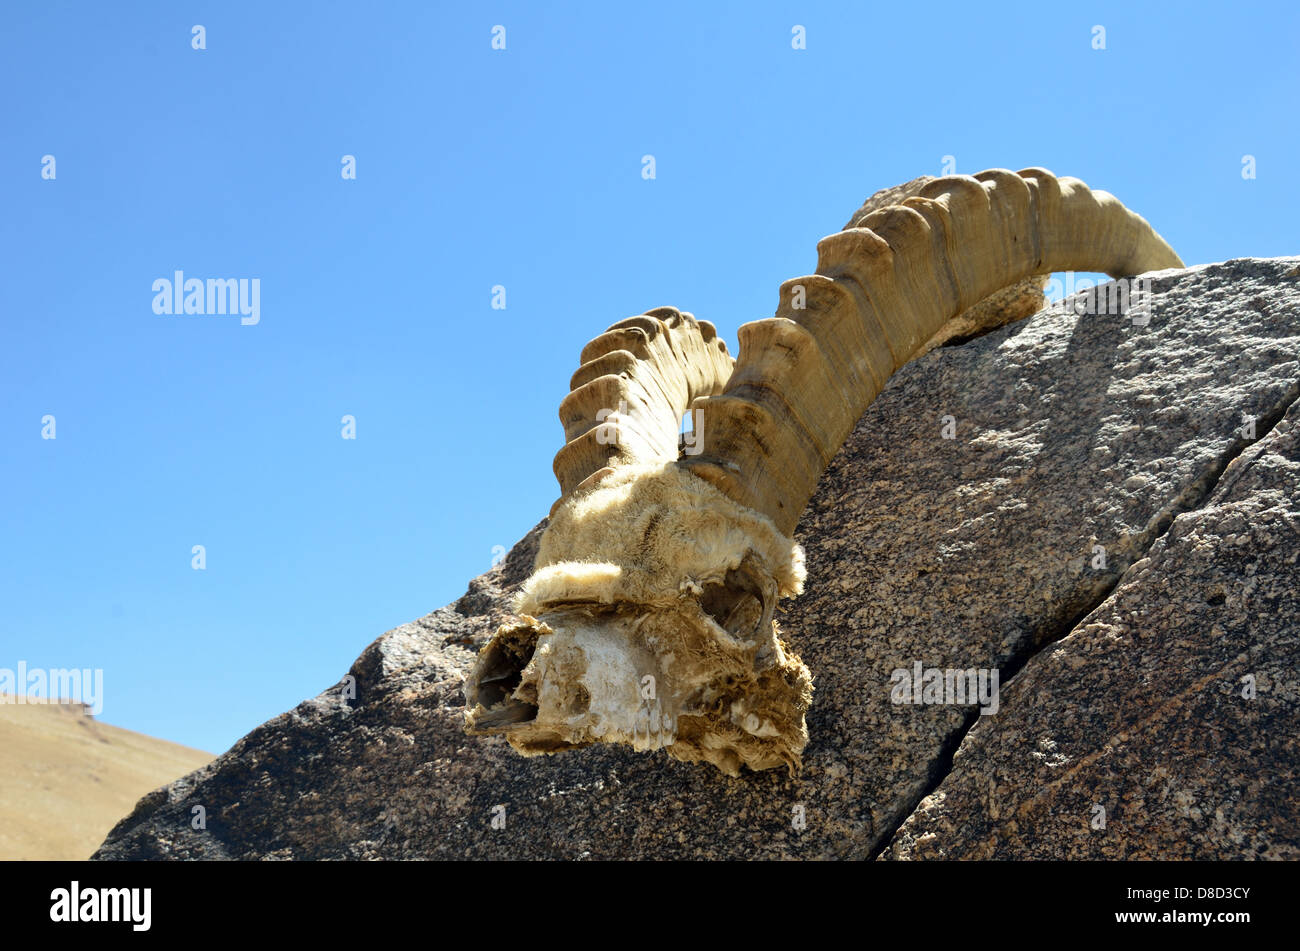 Horns of The Central Asian ibex (Capra sibirica) Stock Photo